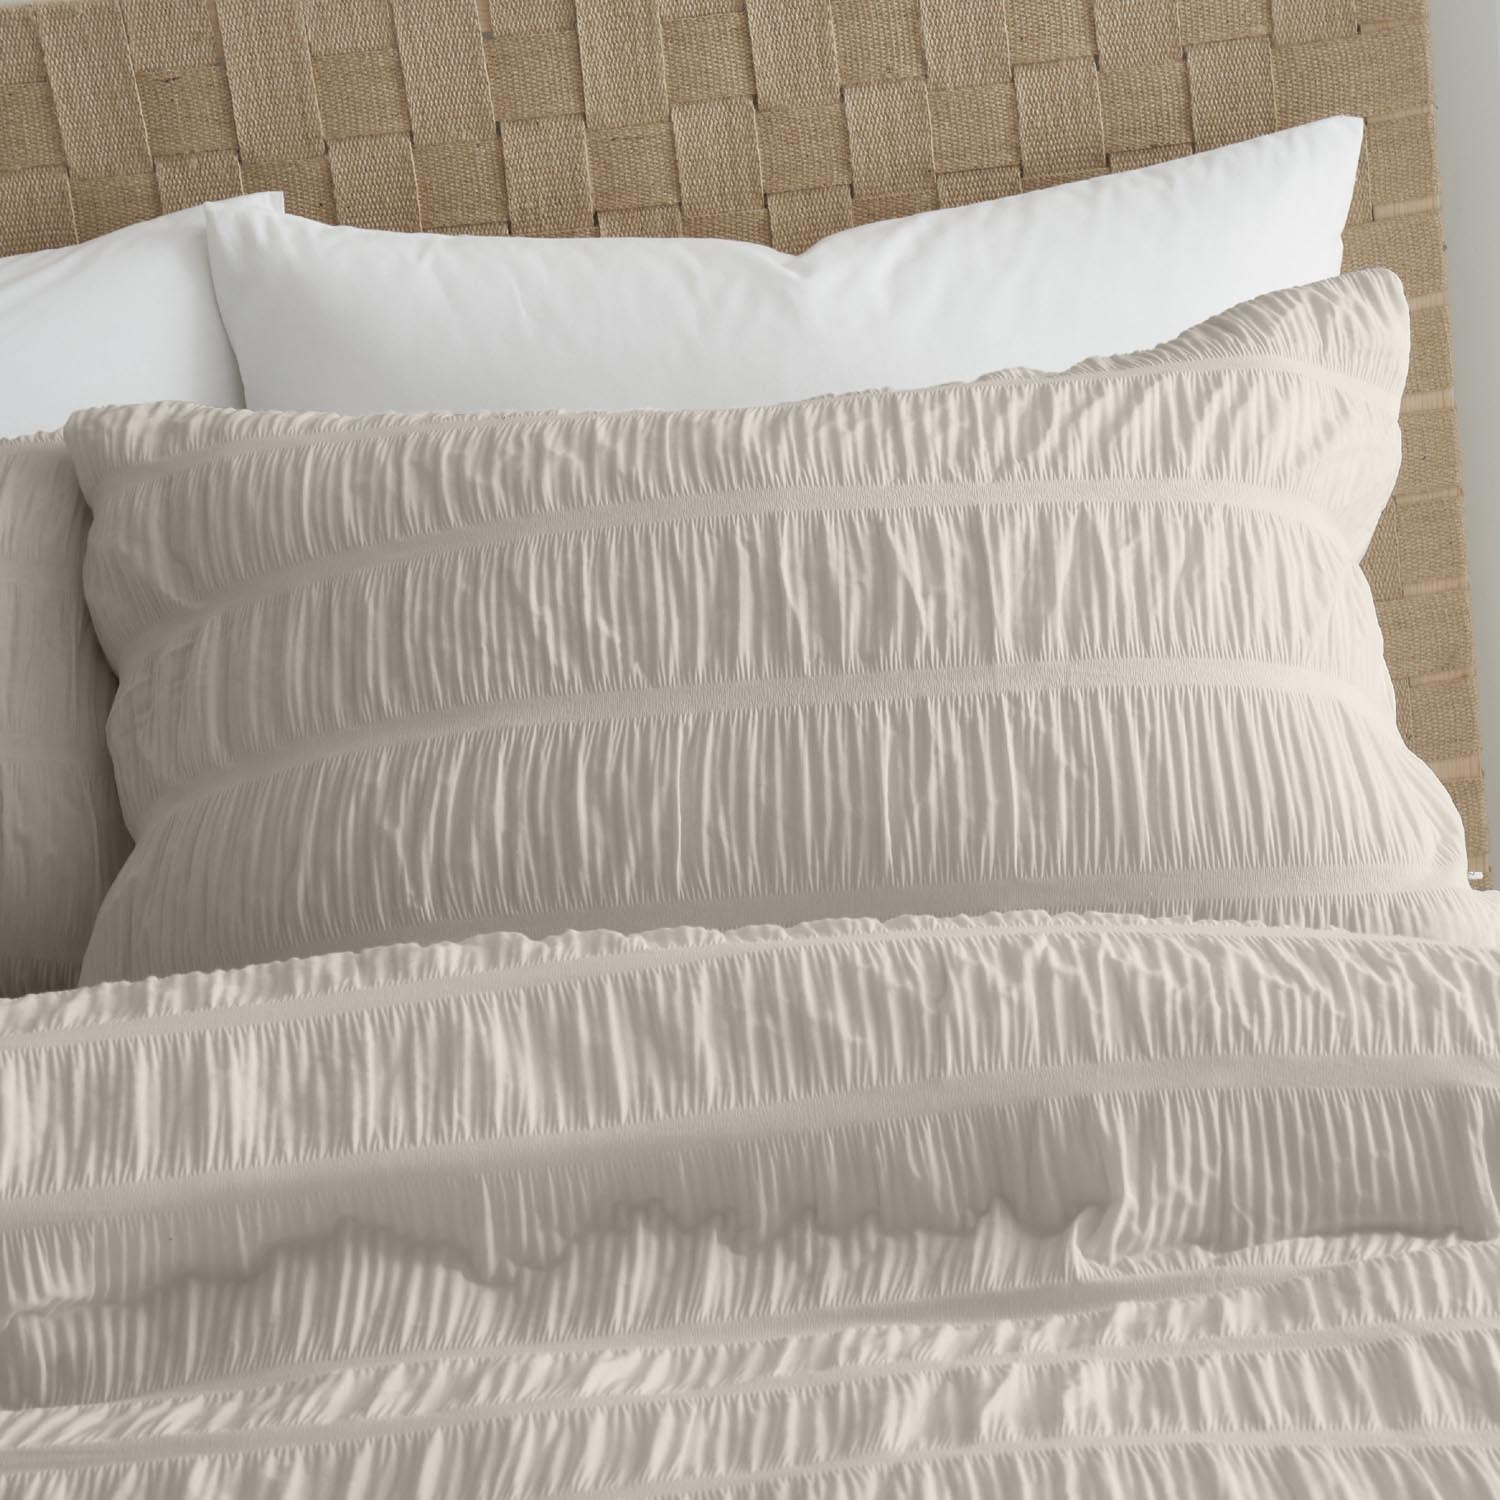 The Home Luxury Collection Textured Seersucker Duvet Cover 3 Shaws Department Stores